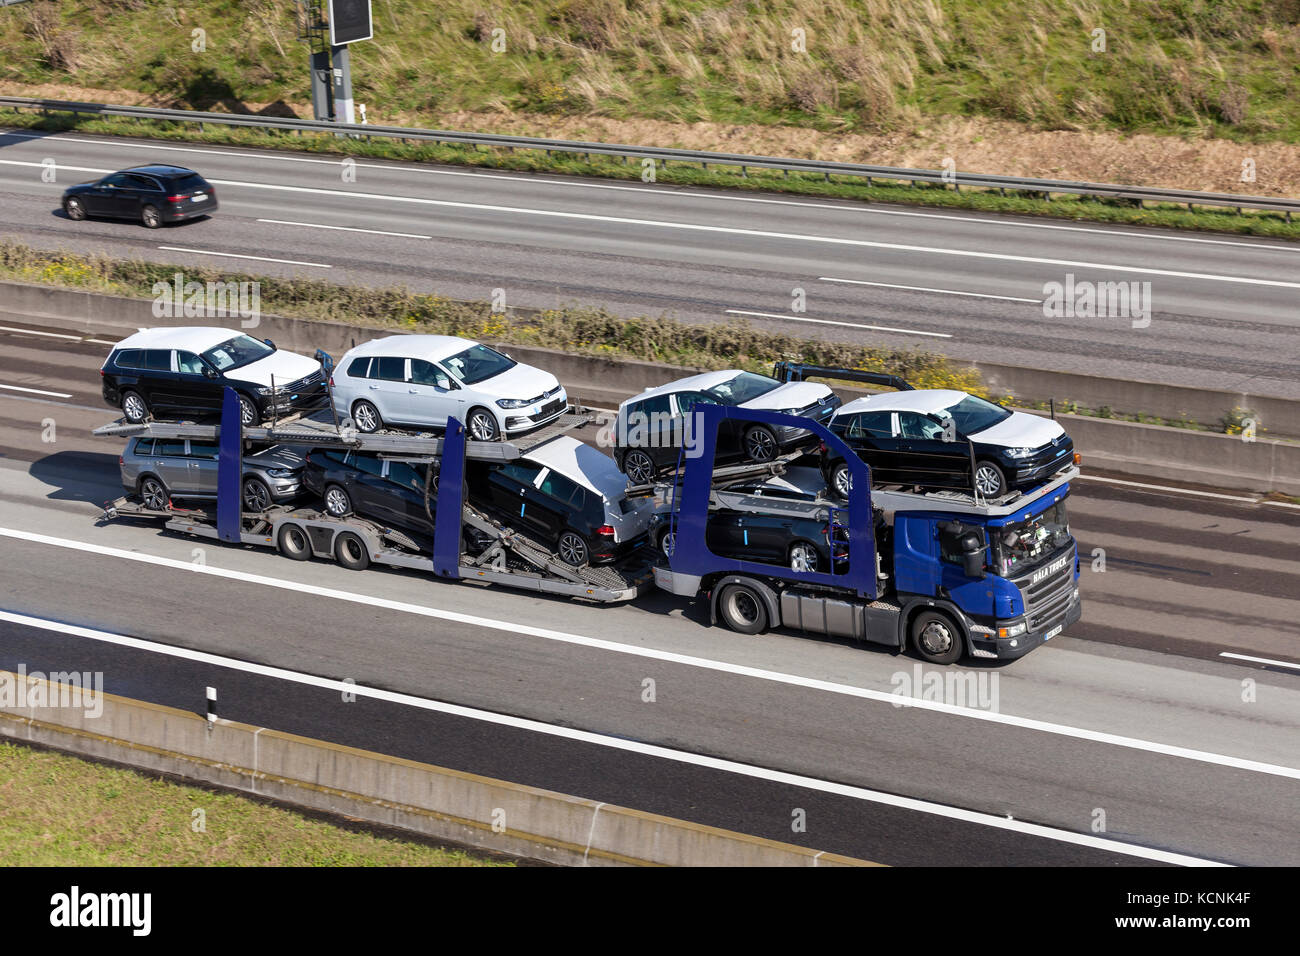 Frankfurt, Germany - Sep 19, 2017: Scania P410 car transporter hauls new Volkswagen Golf cars along the A45 highway in Germany Stock Photo